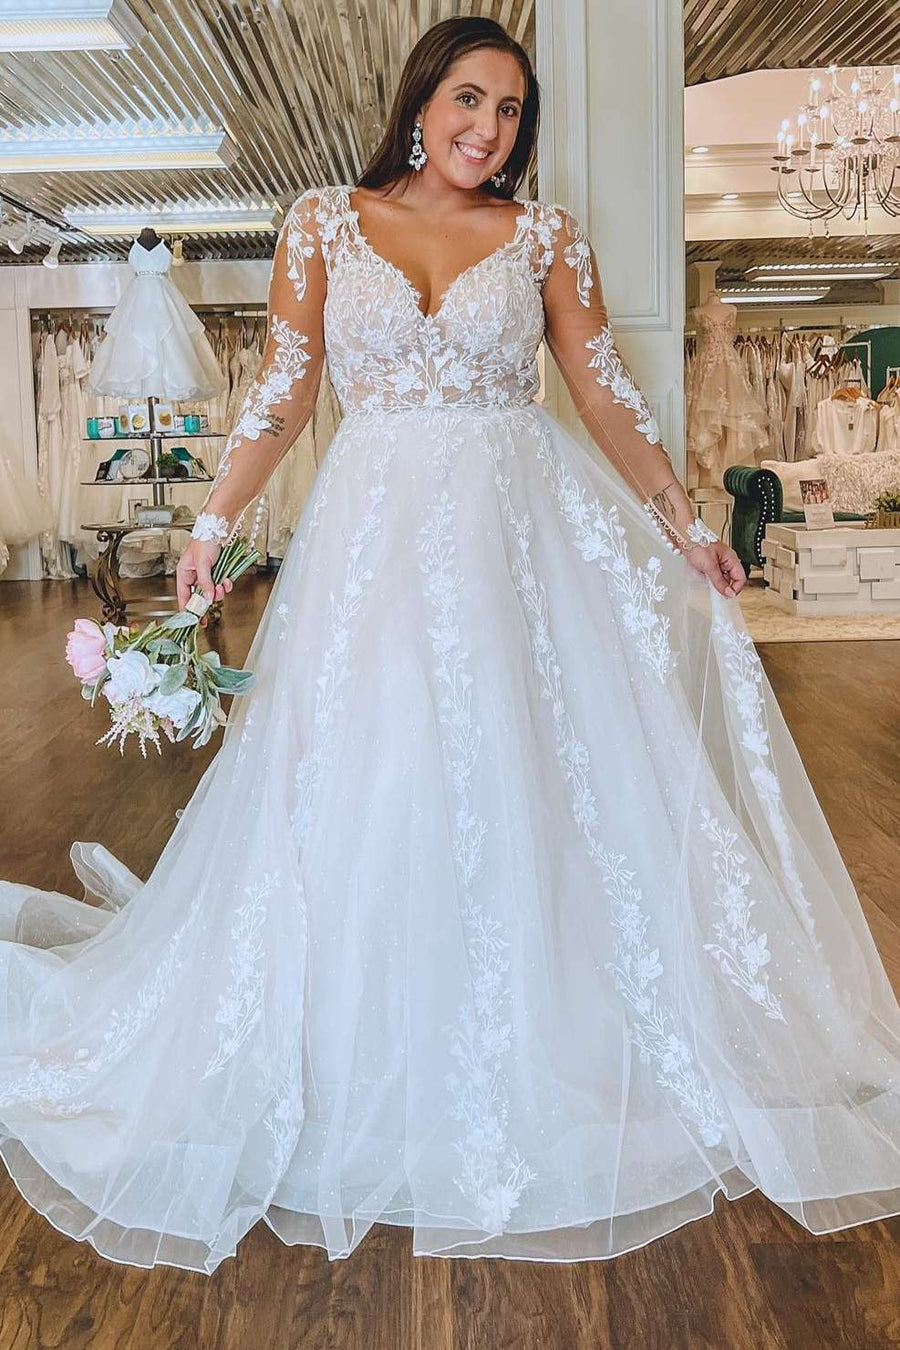 White Floral Lace Queen Anne Long Sleeve Wedding Dress